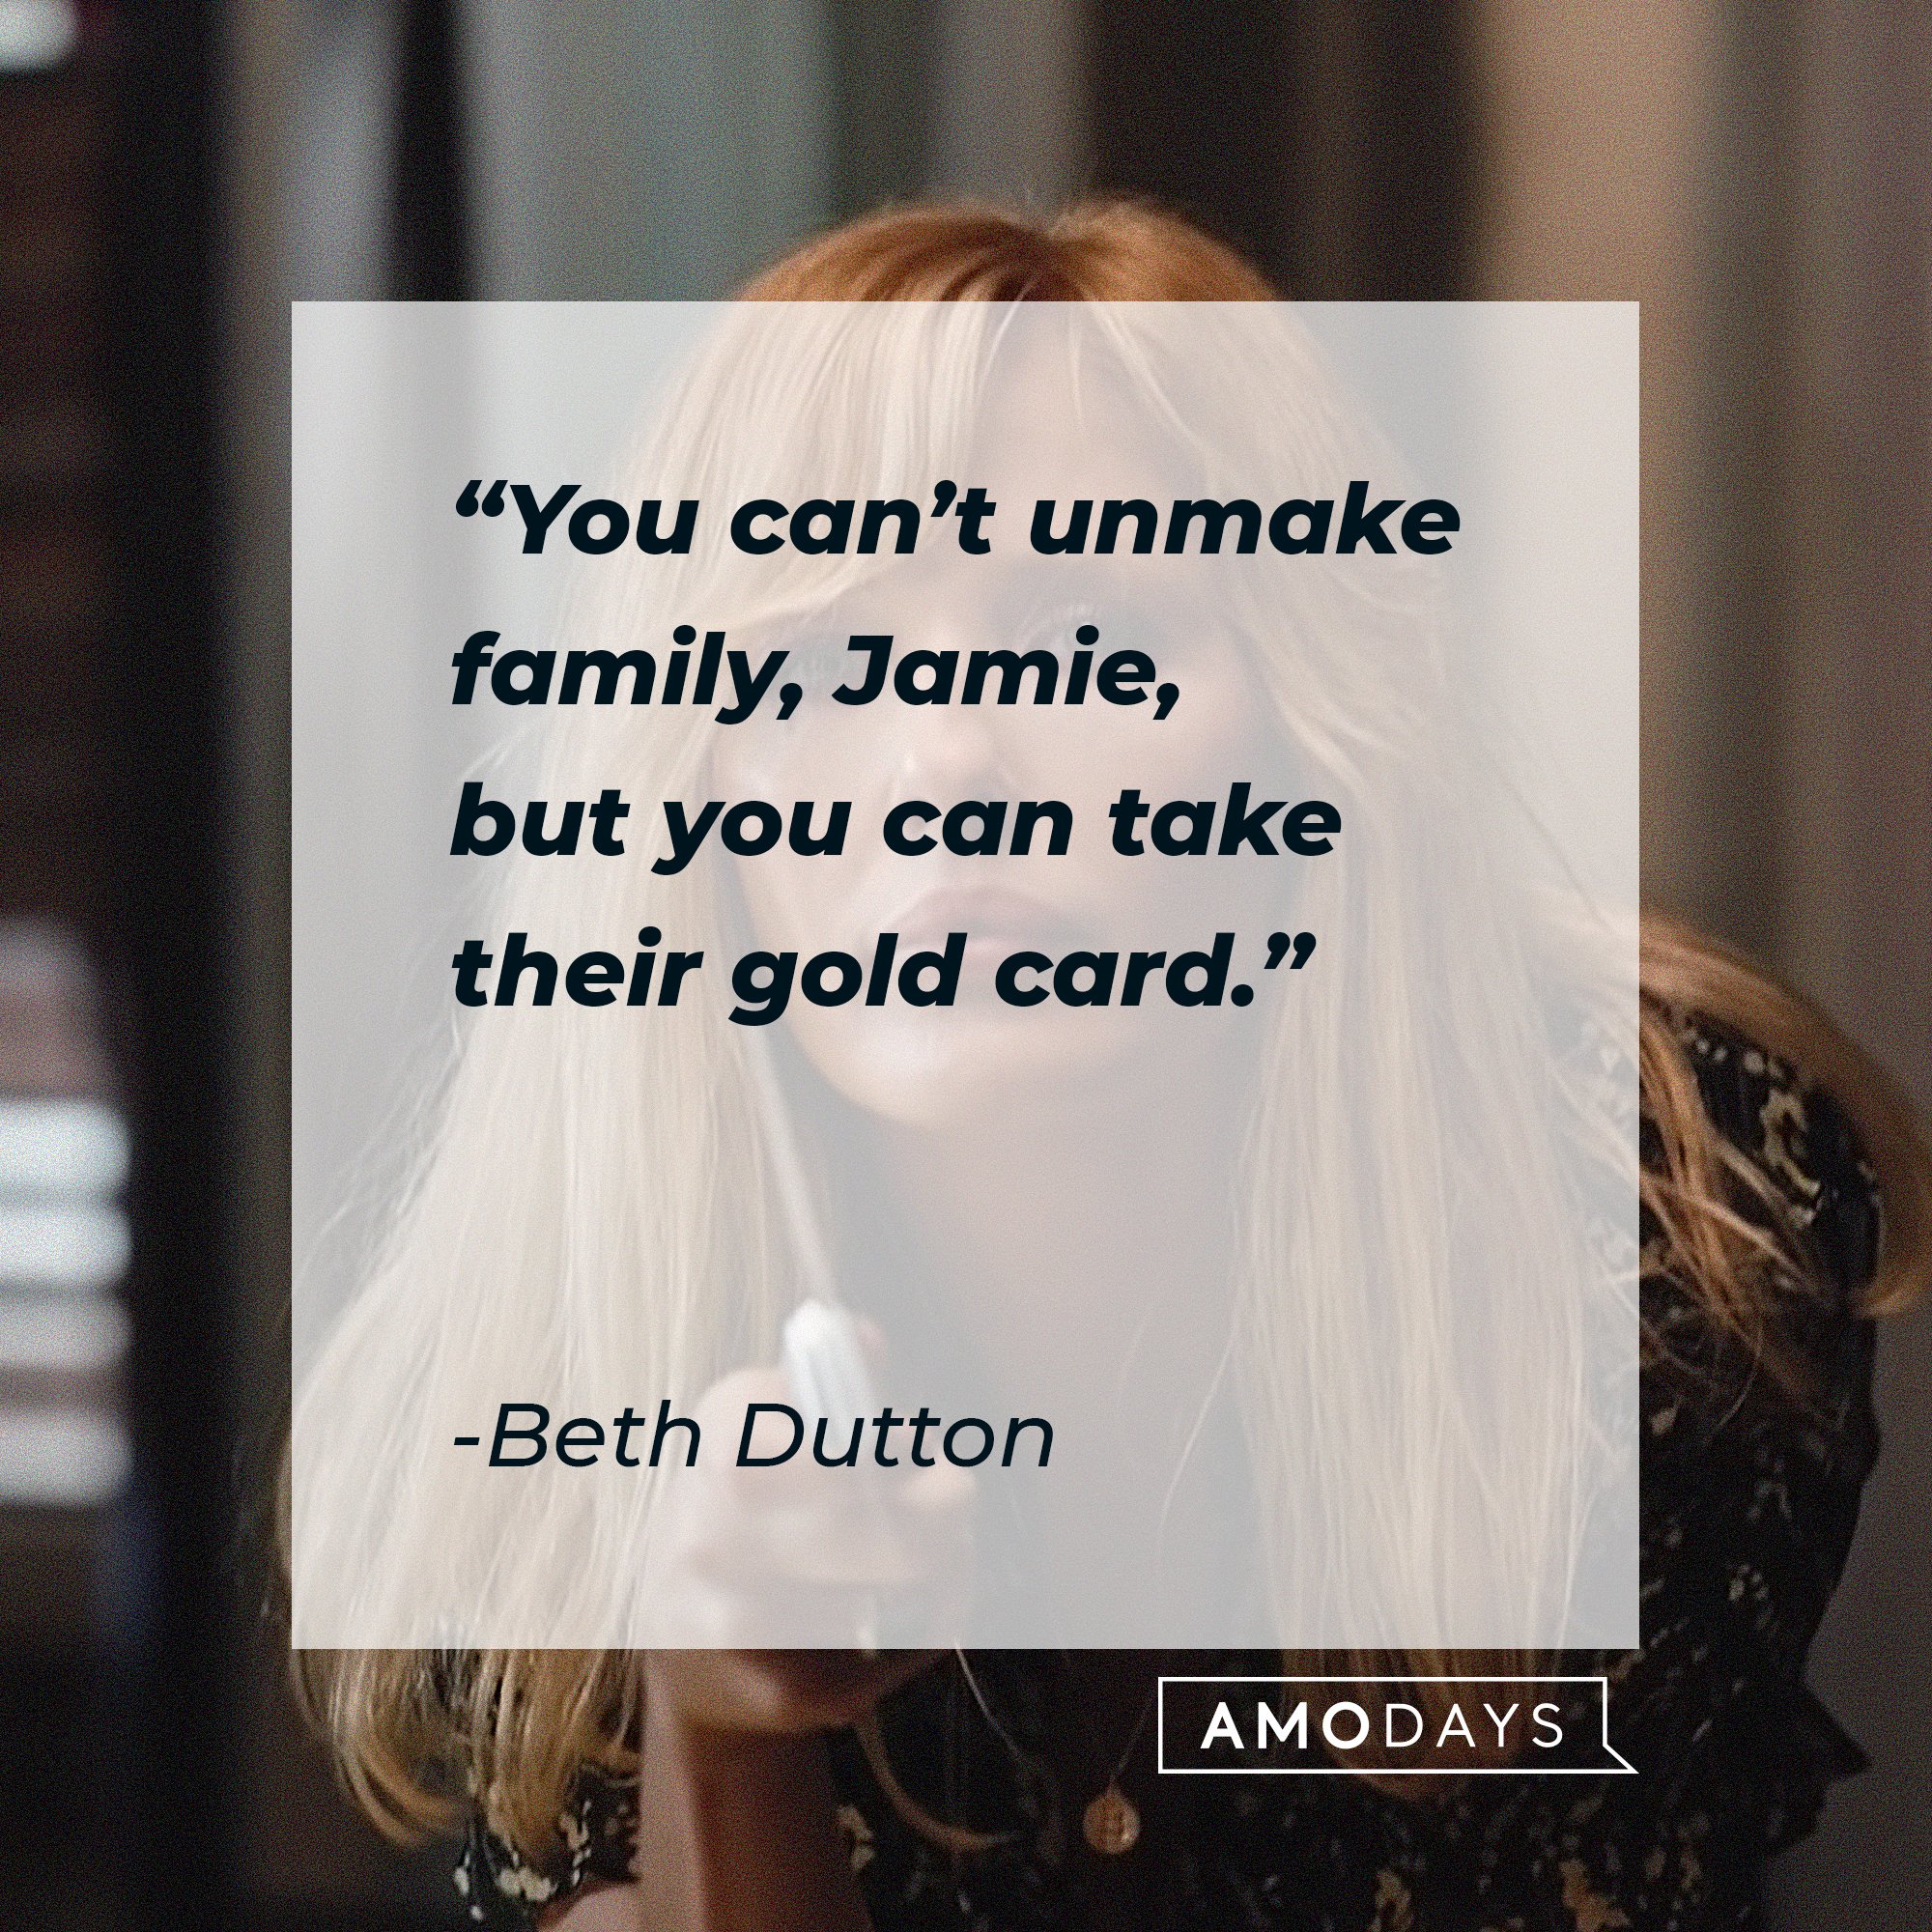  Beth Dutton's quote: "You can't unmake family, Jamie, but you can take their gold card." | Source: AmoDays